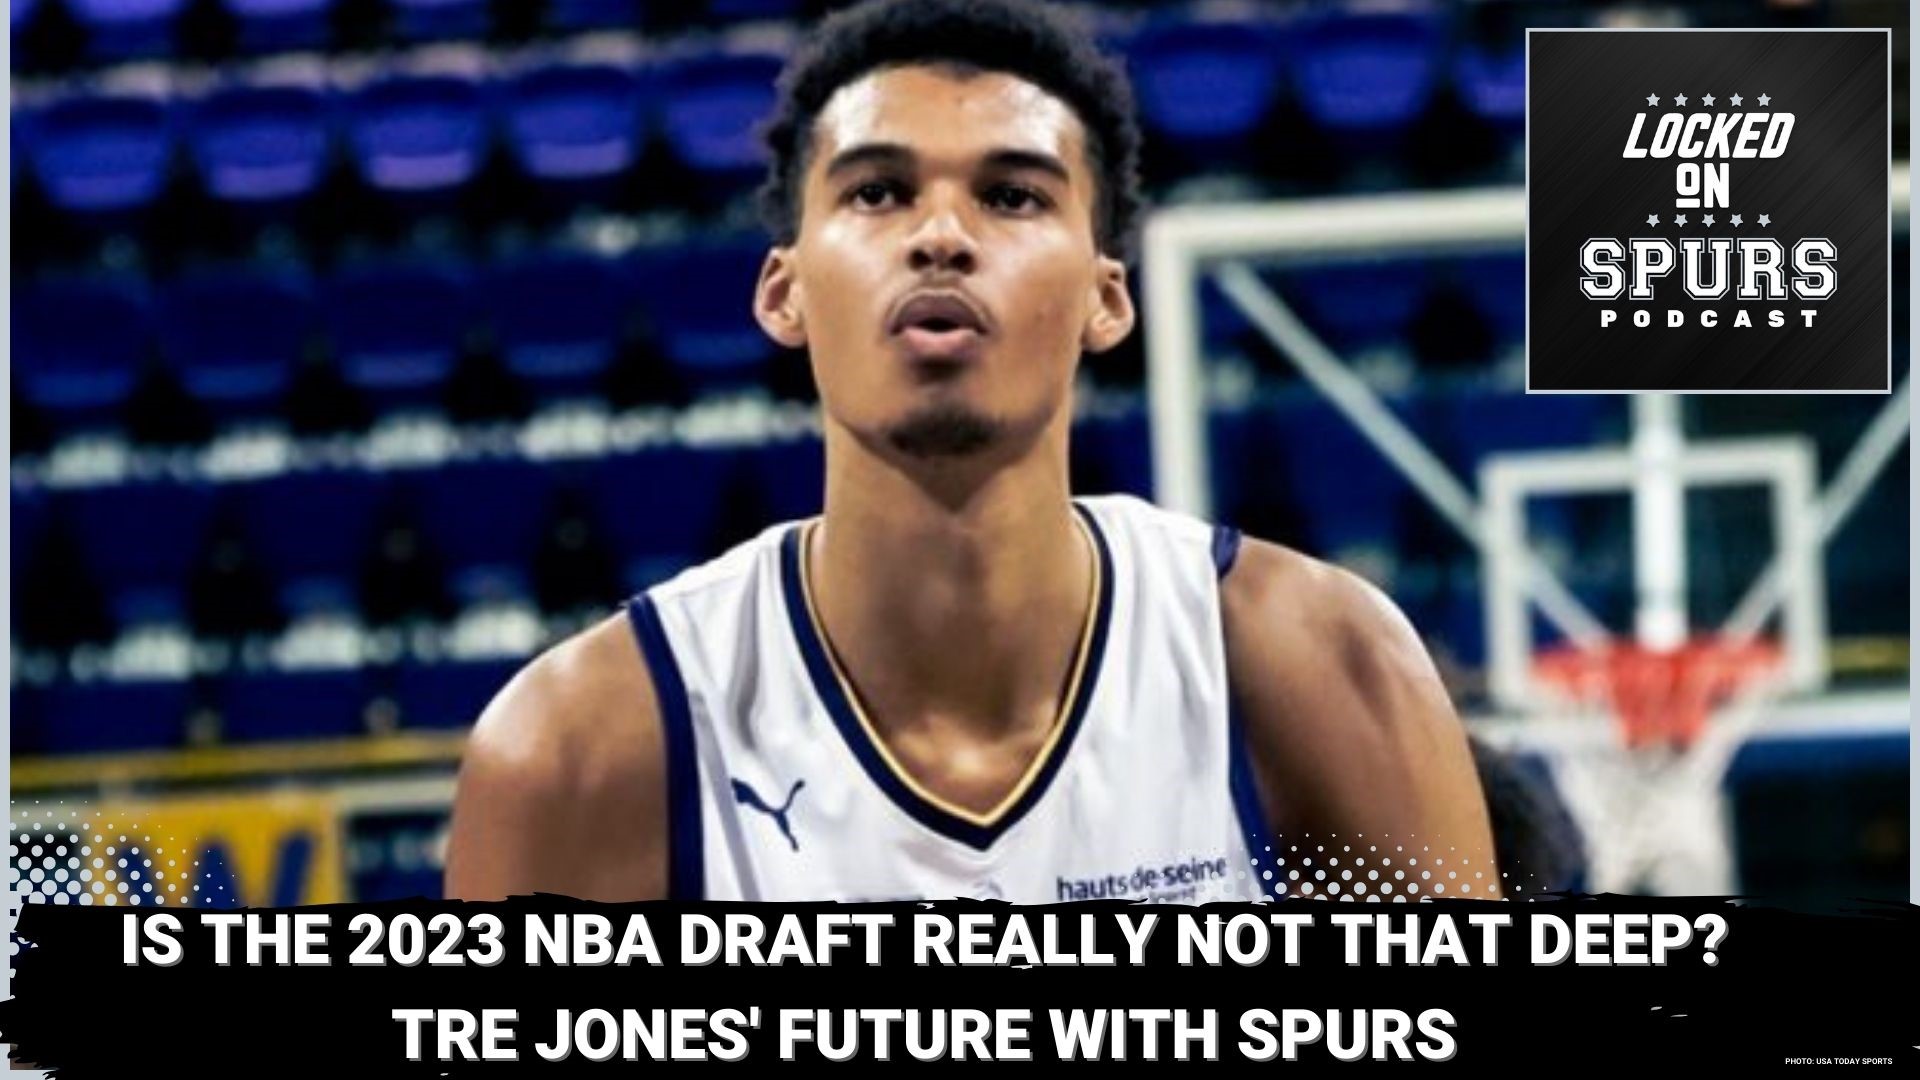 Has Jones proven to be a big piece in the Spurs' rebuild?